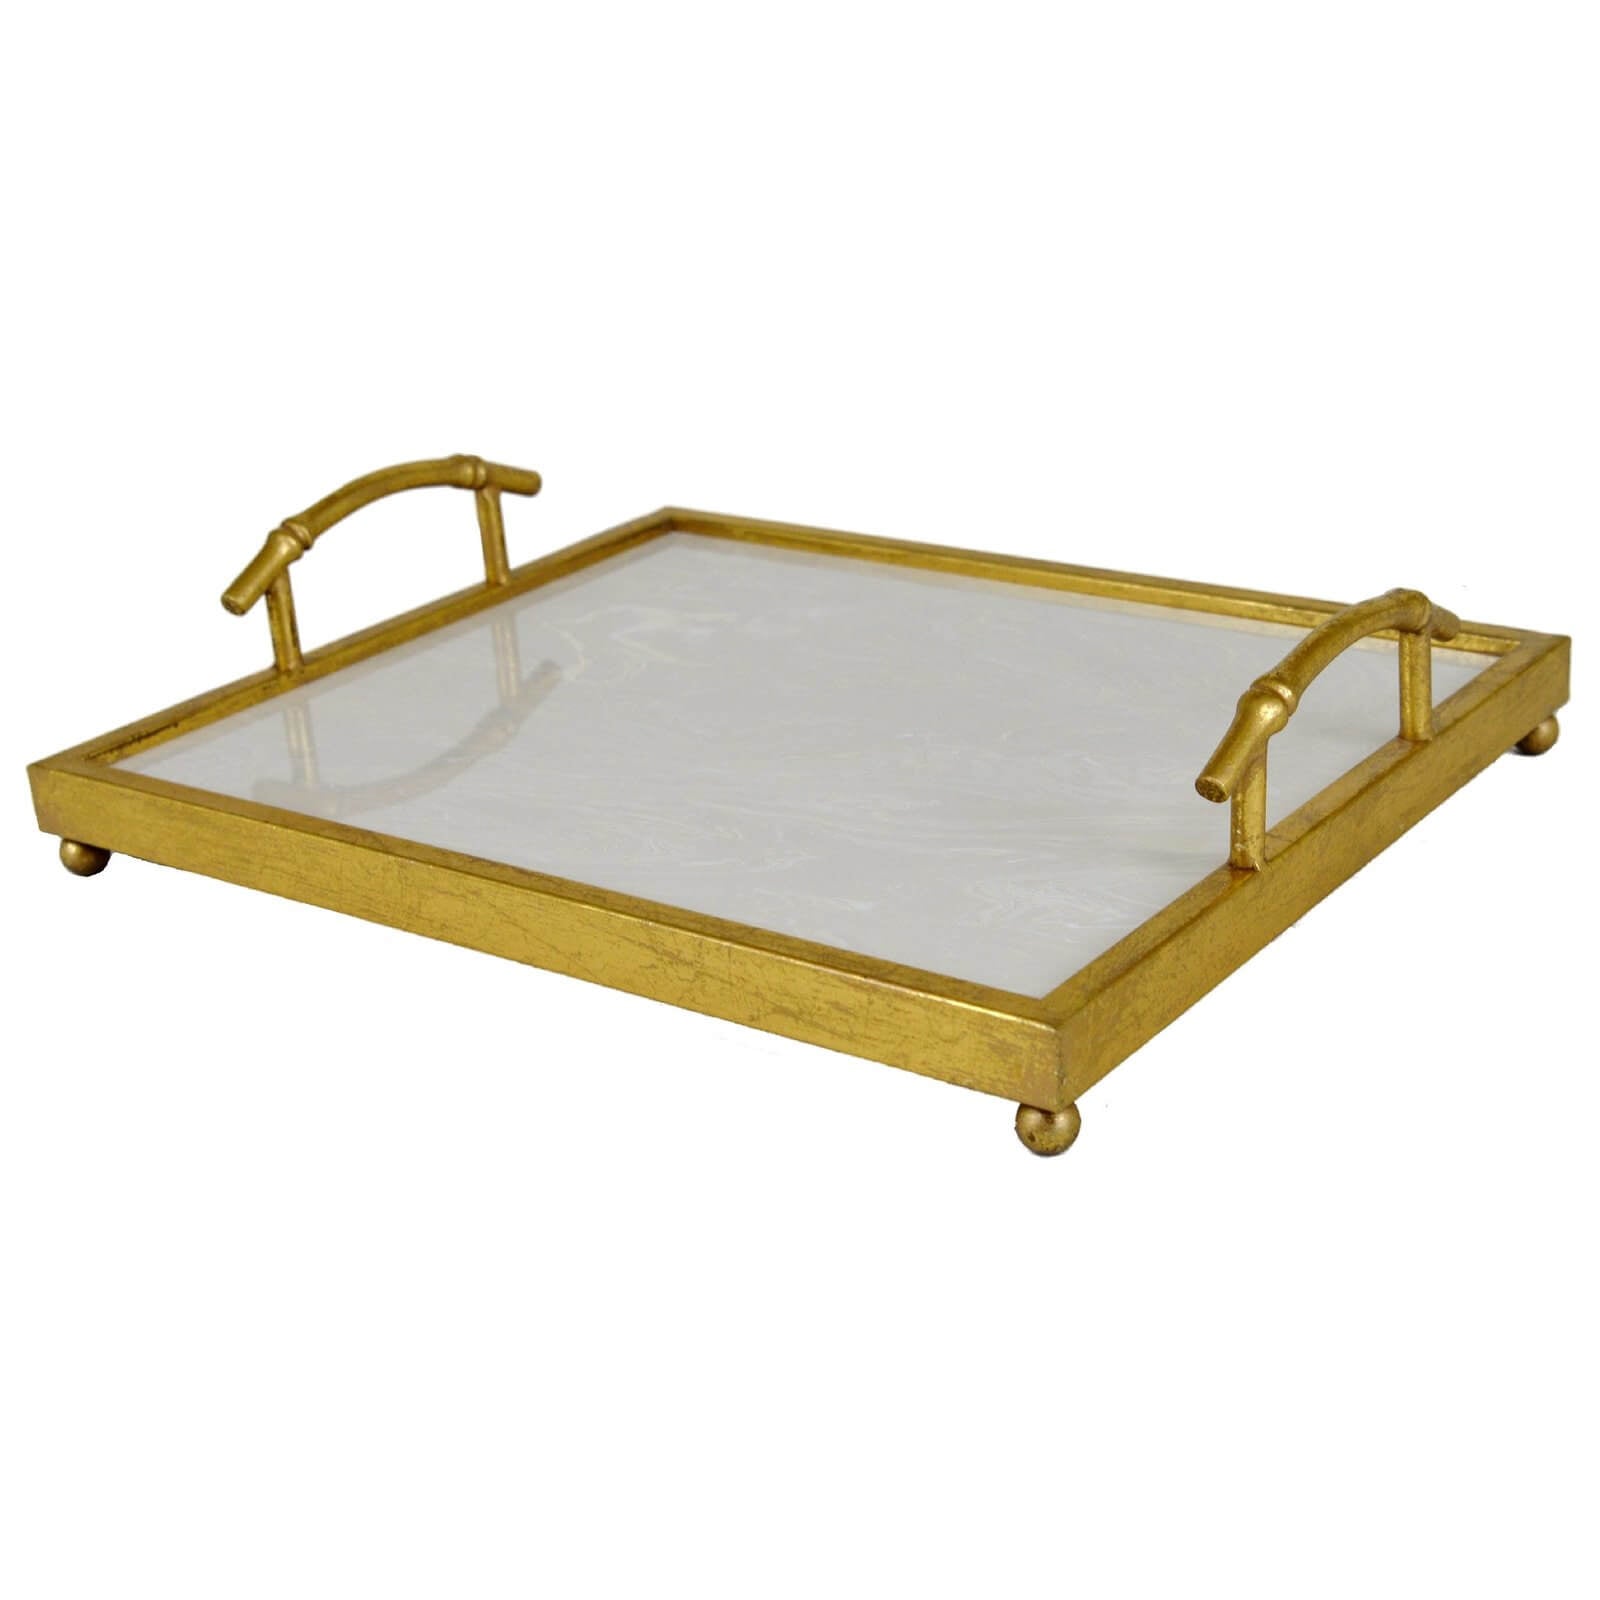 Lalana Gold Tray with White Stone - Lillian Home 